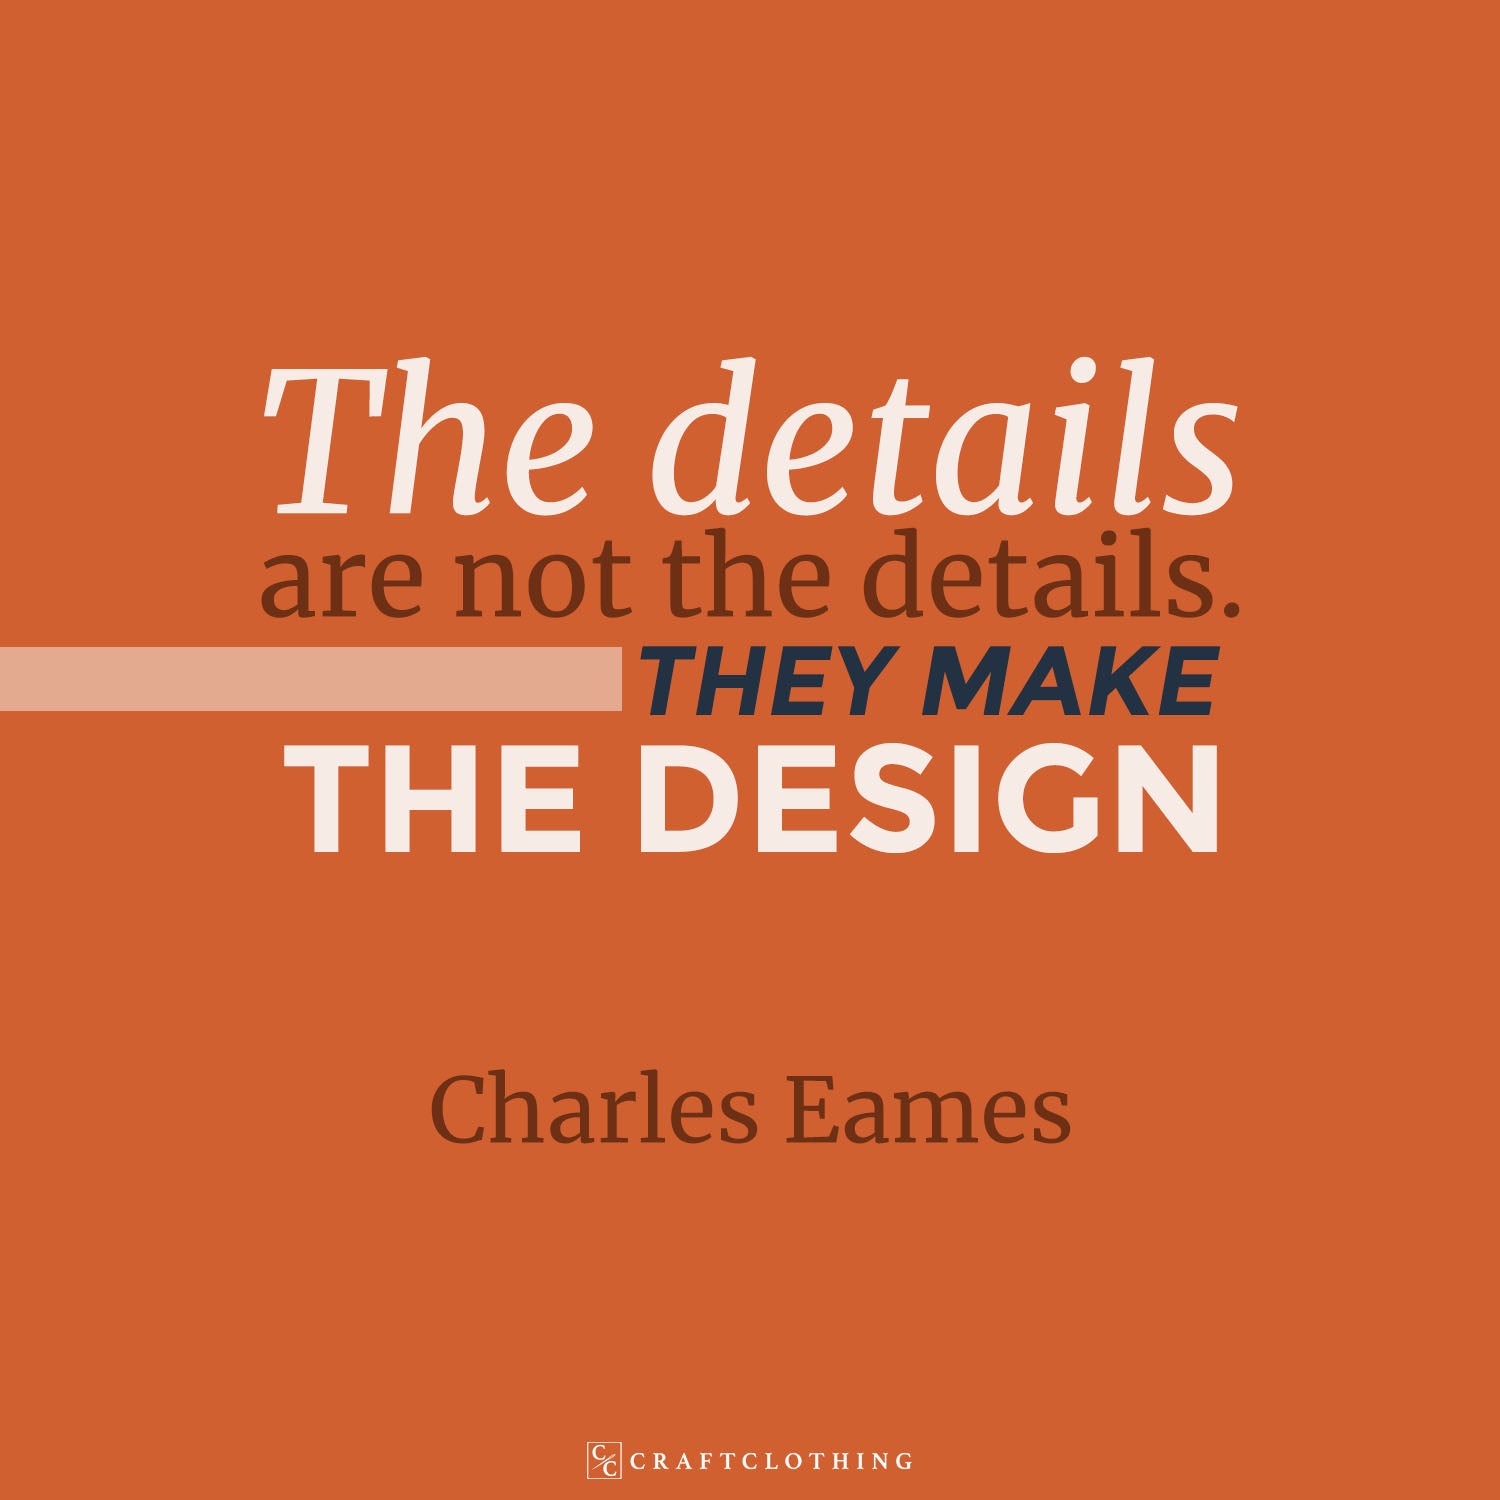 The details are not the details. THEY MAKE THE DESIGN